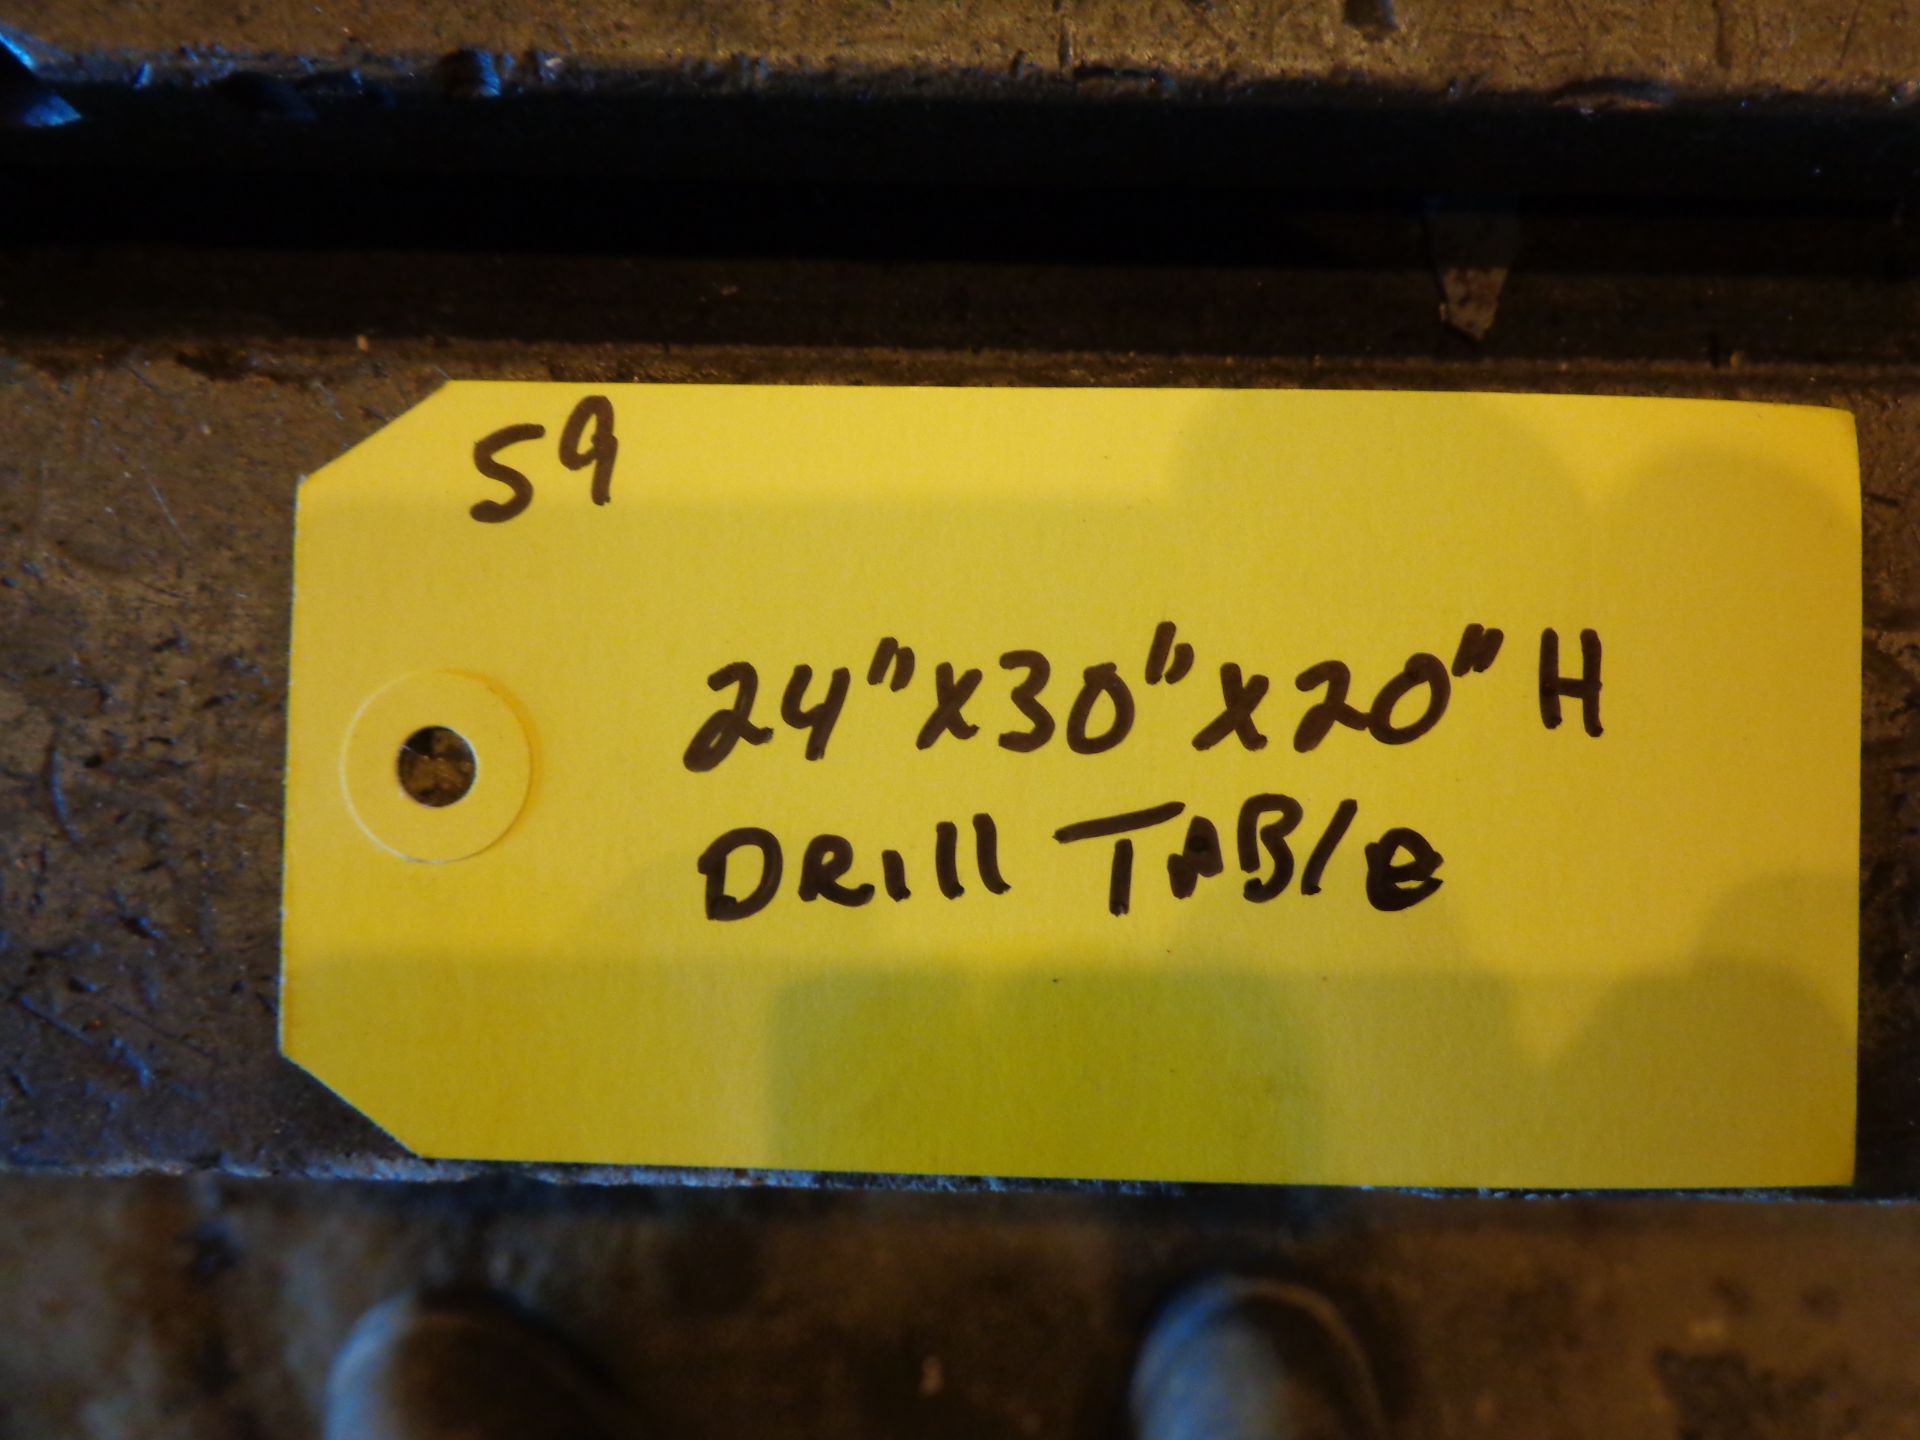 24” x 30” x 30” Drill table (#59) - Image 11 of 11